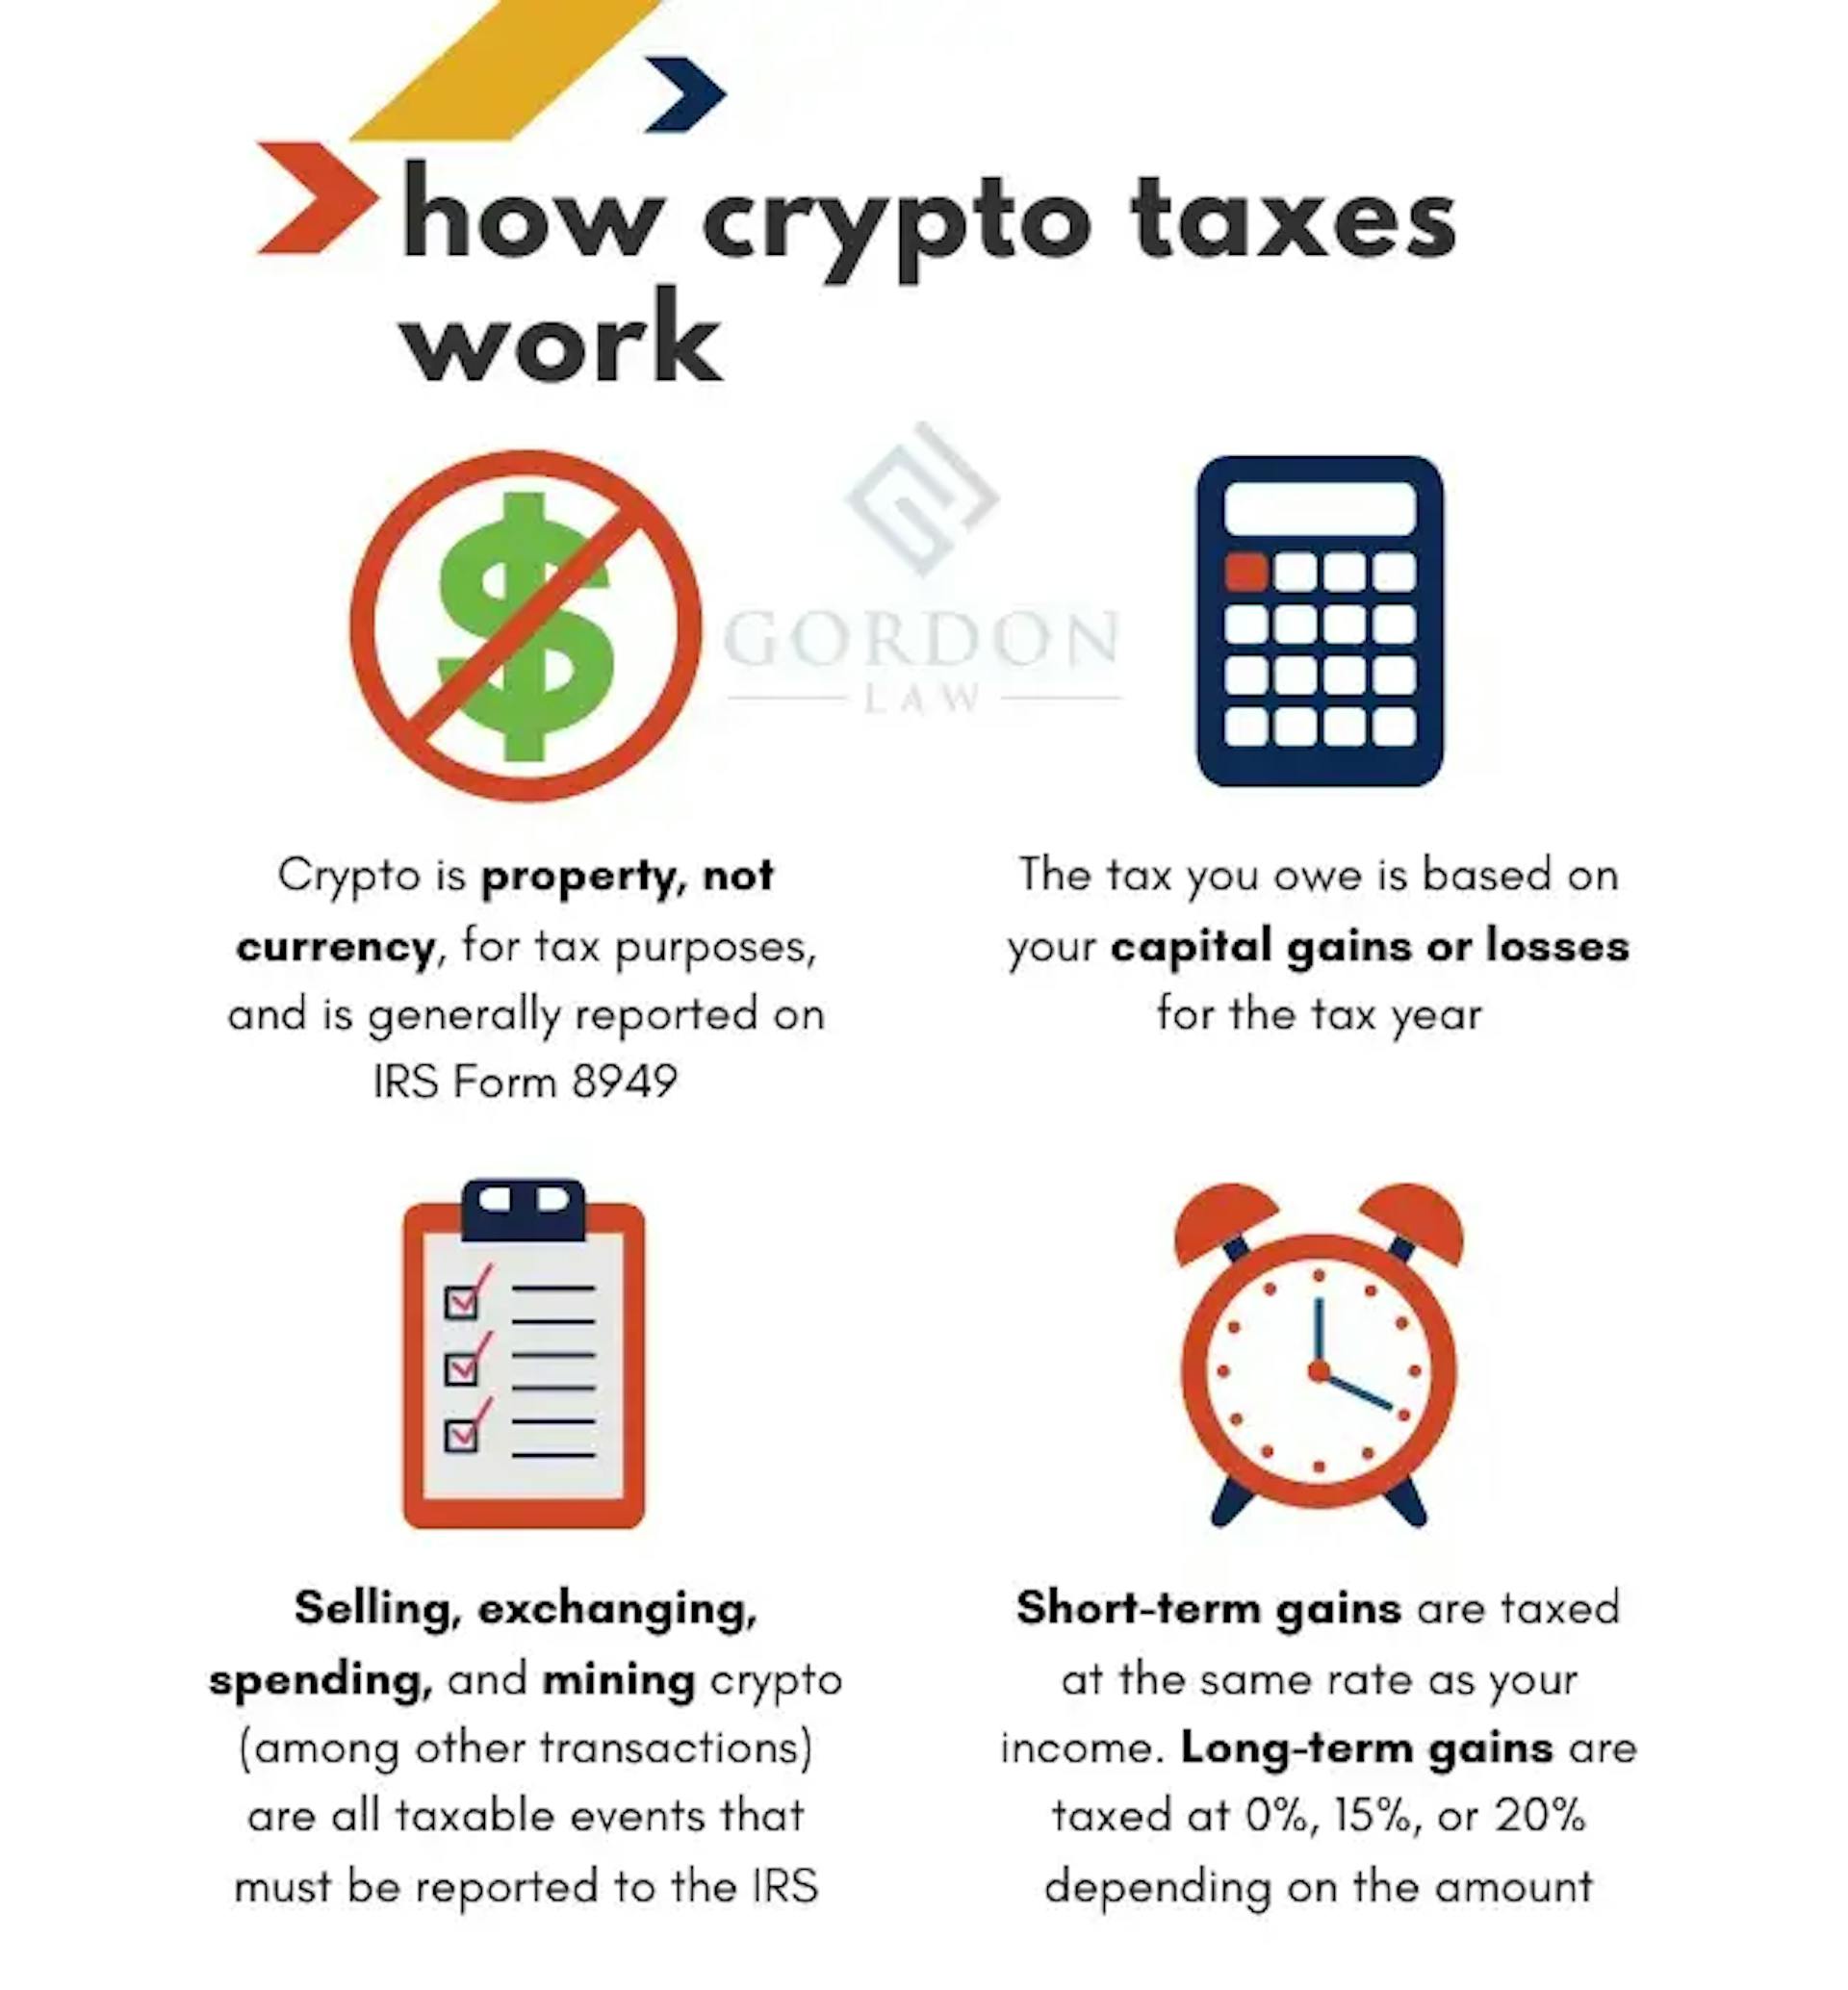 Cryptocurrency Tax Laws in the U.S. (source: Lexology)